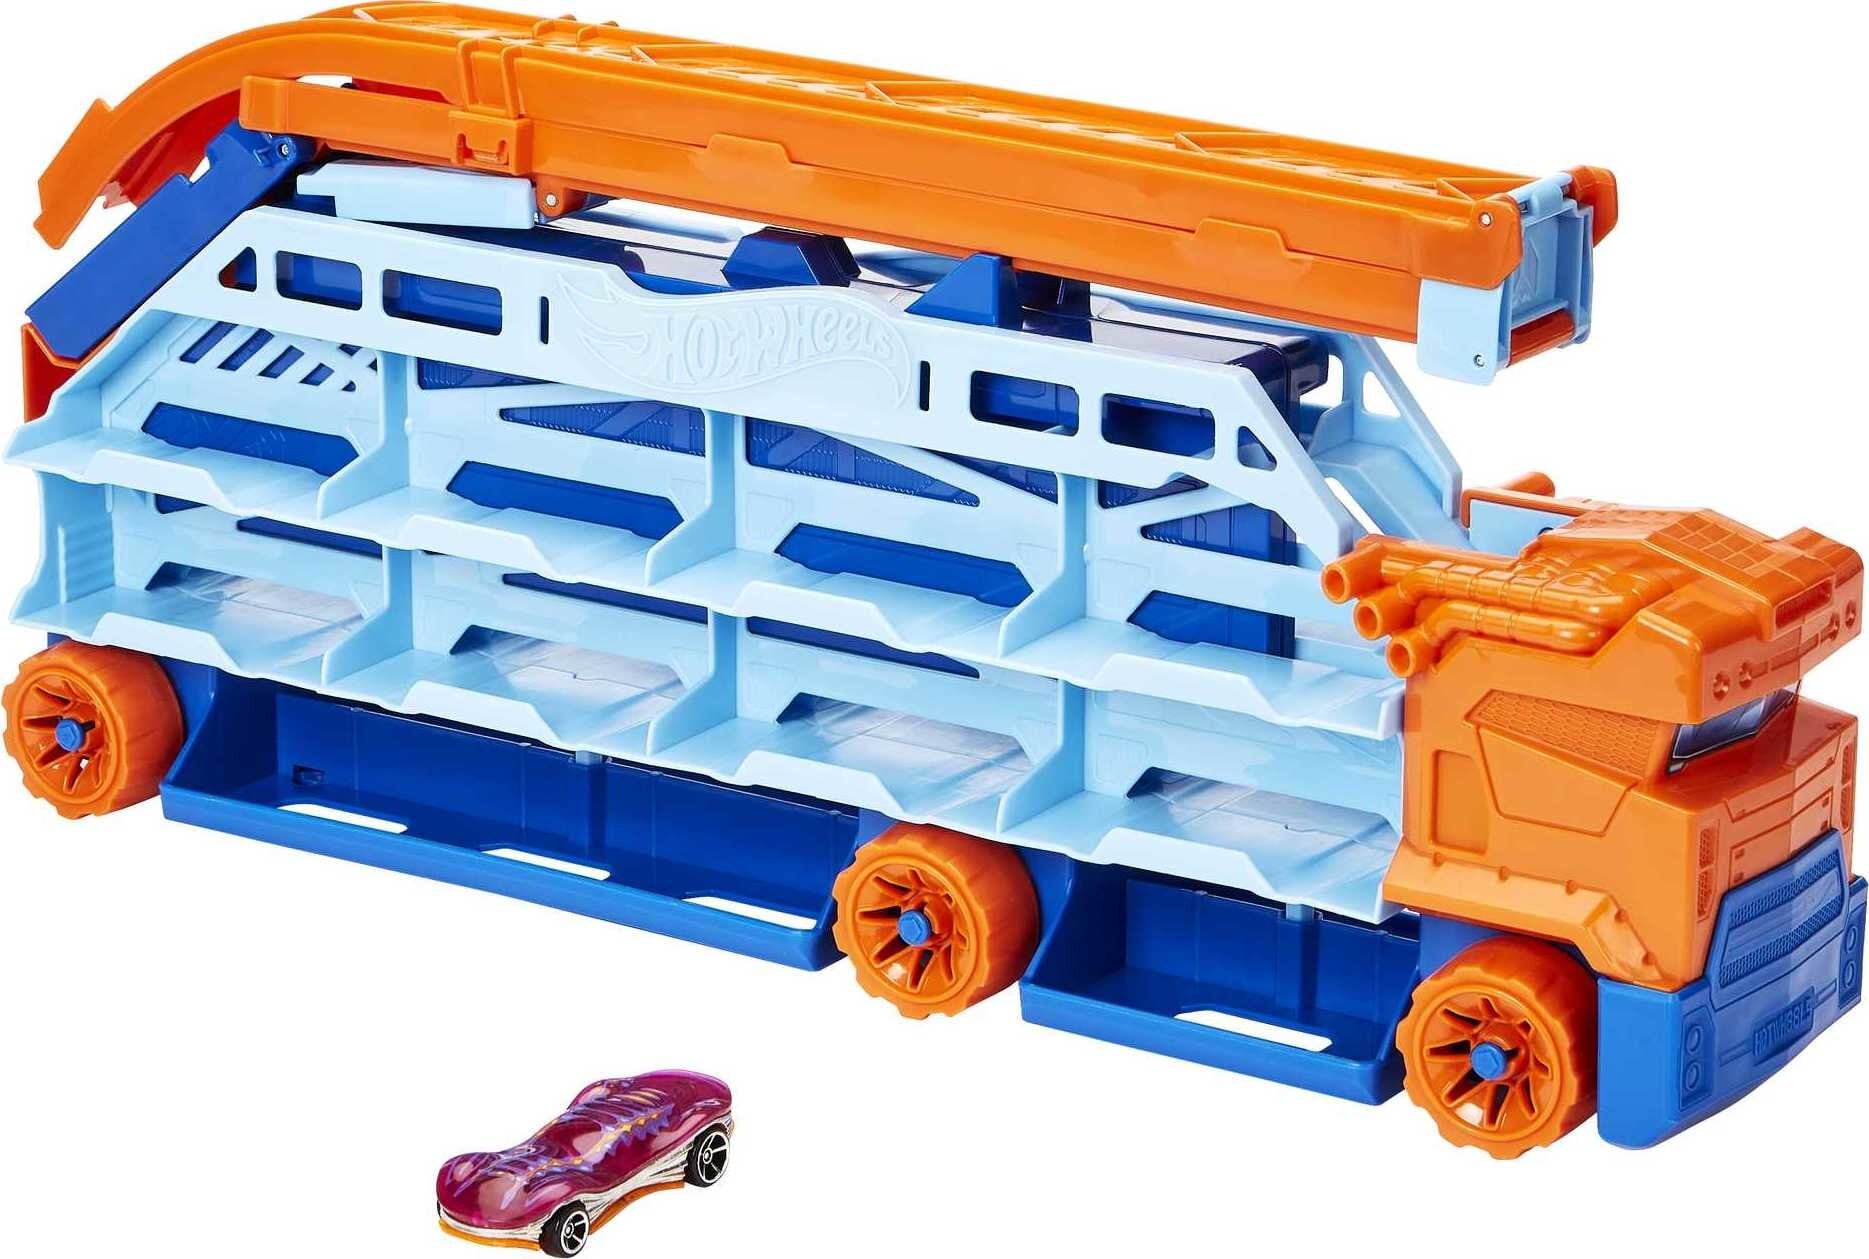 Hot Wheels City Speed Drop Transport Hauler with 1 Toy Car, 20+ 1:64 Scale Vehicles - Walmart.com